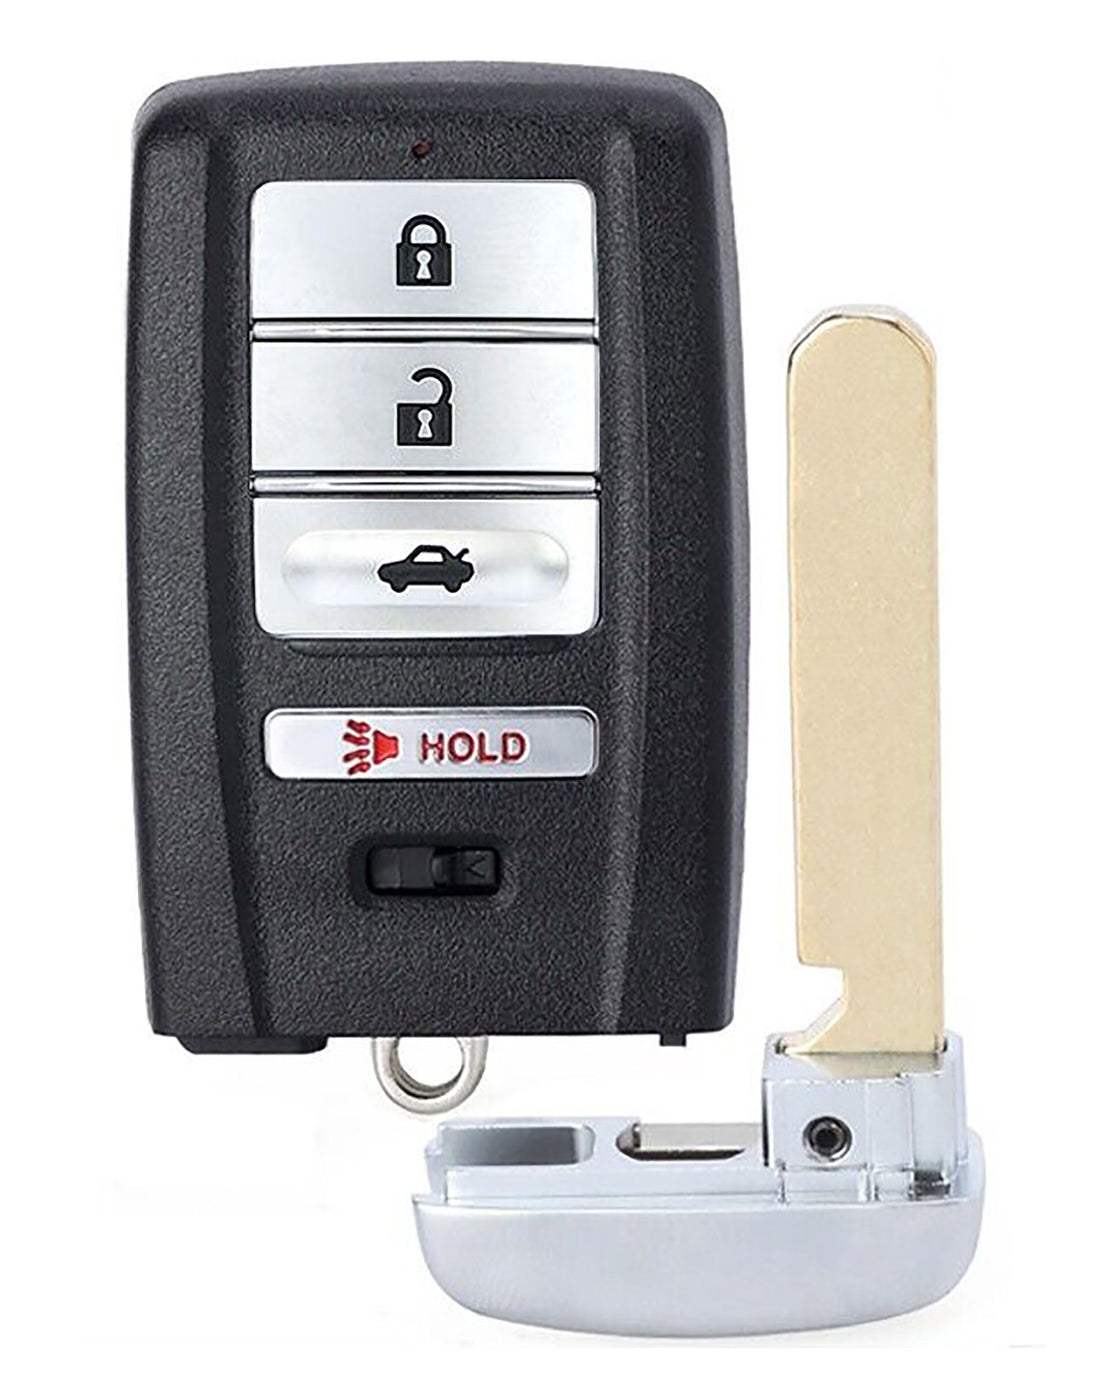 1x New Replacement Proximity Key Fob Compatible with & Fit For Acura Vehicles (Check Fitment) - MPN KR5V1X-AC-02